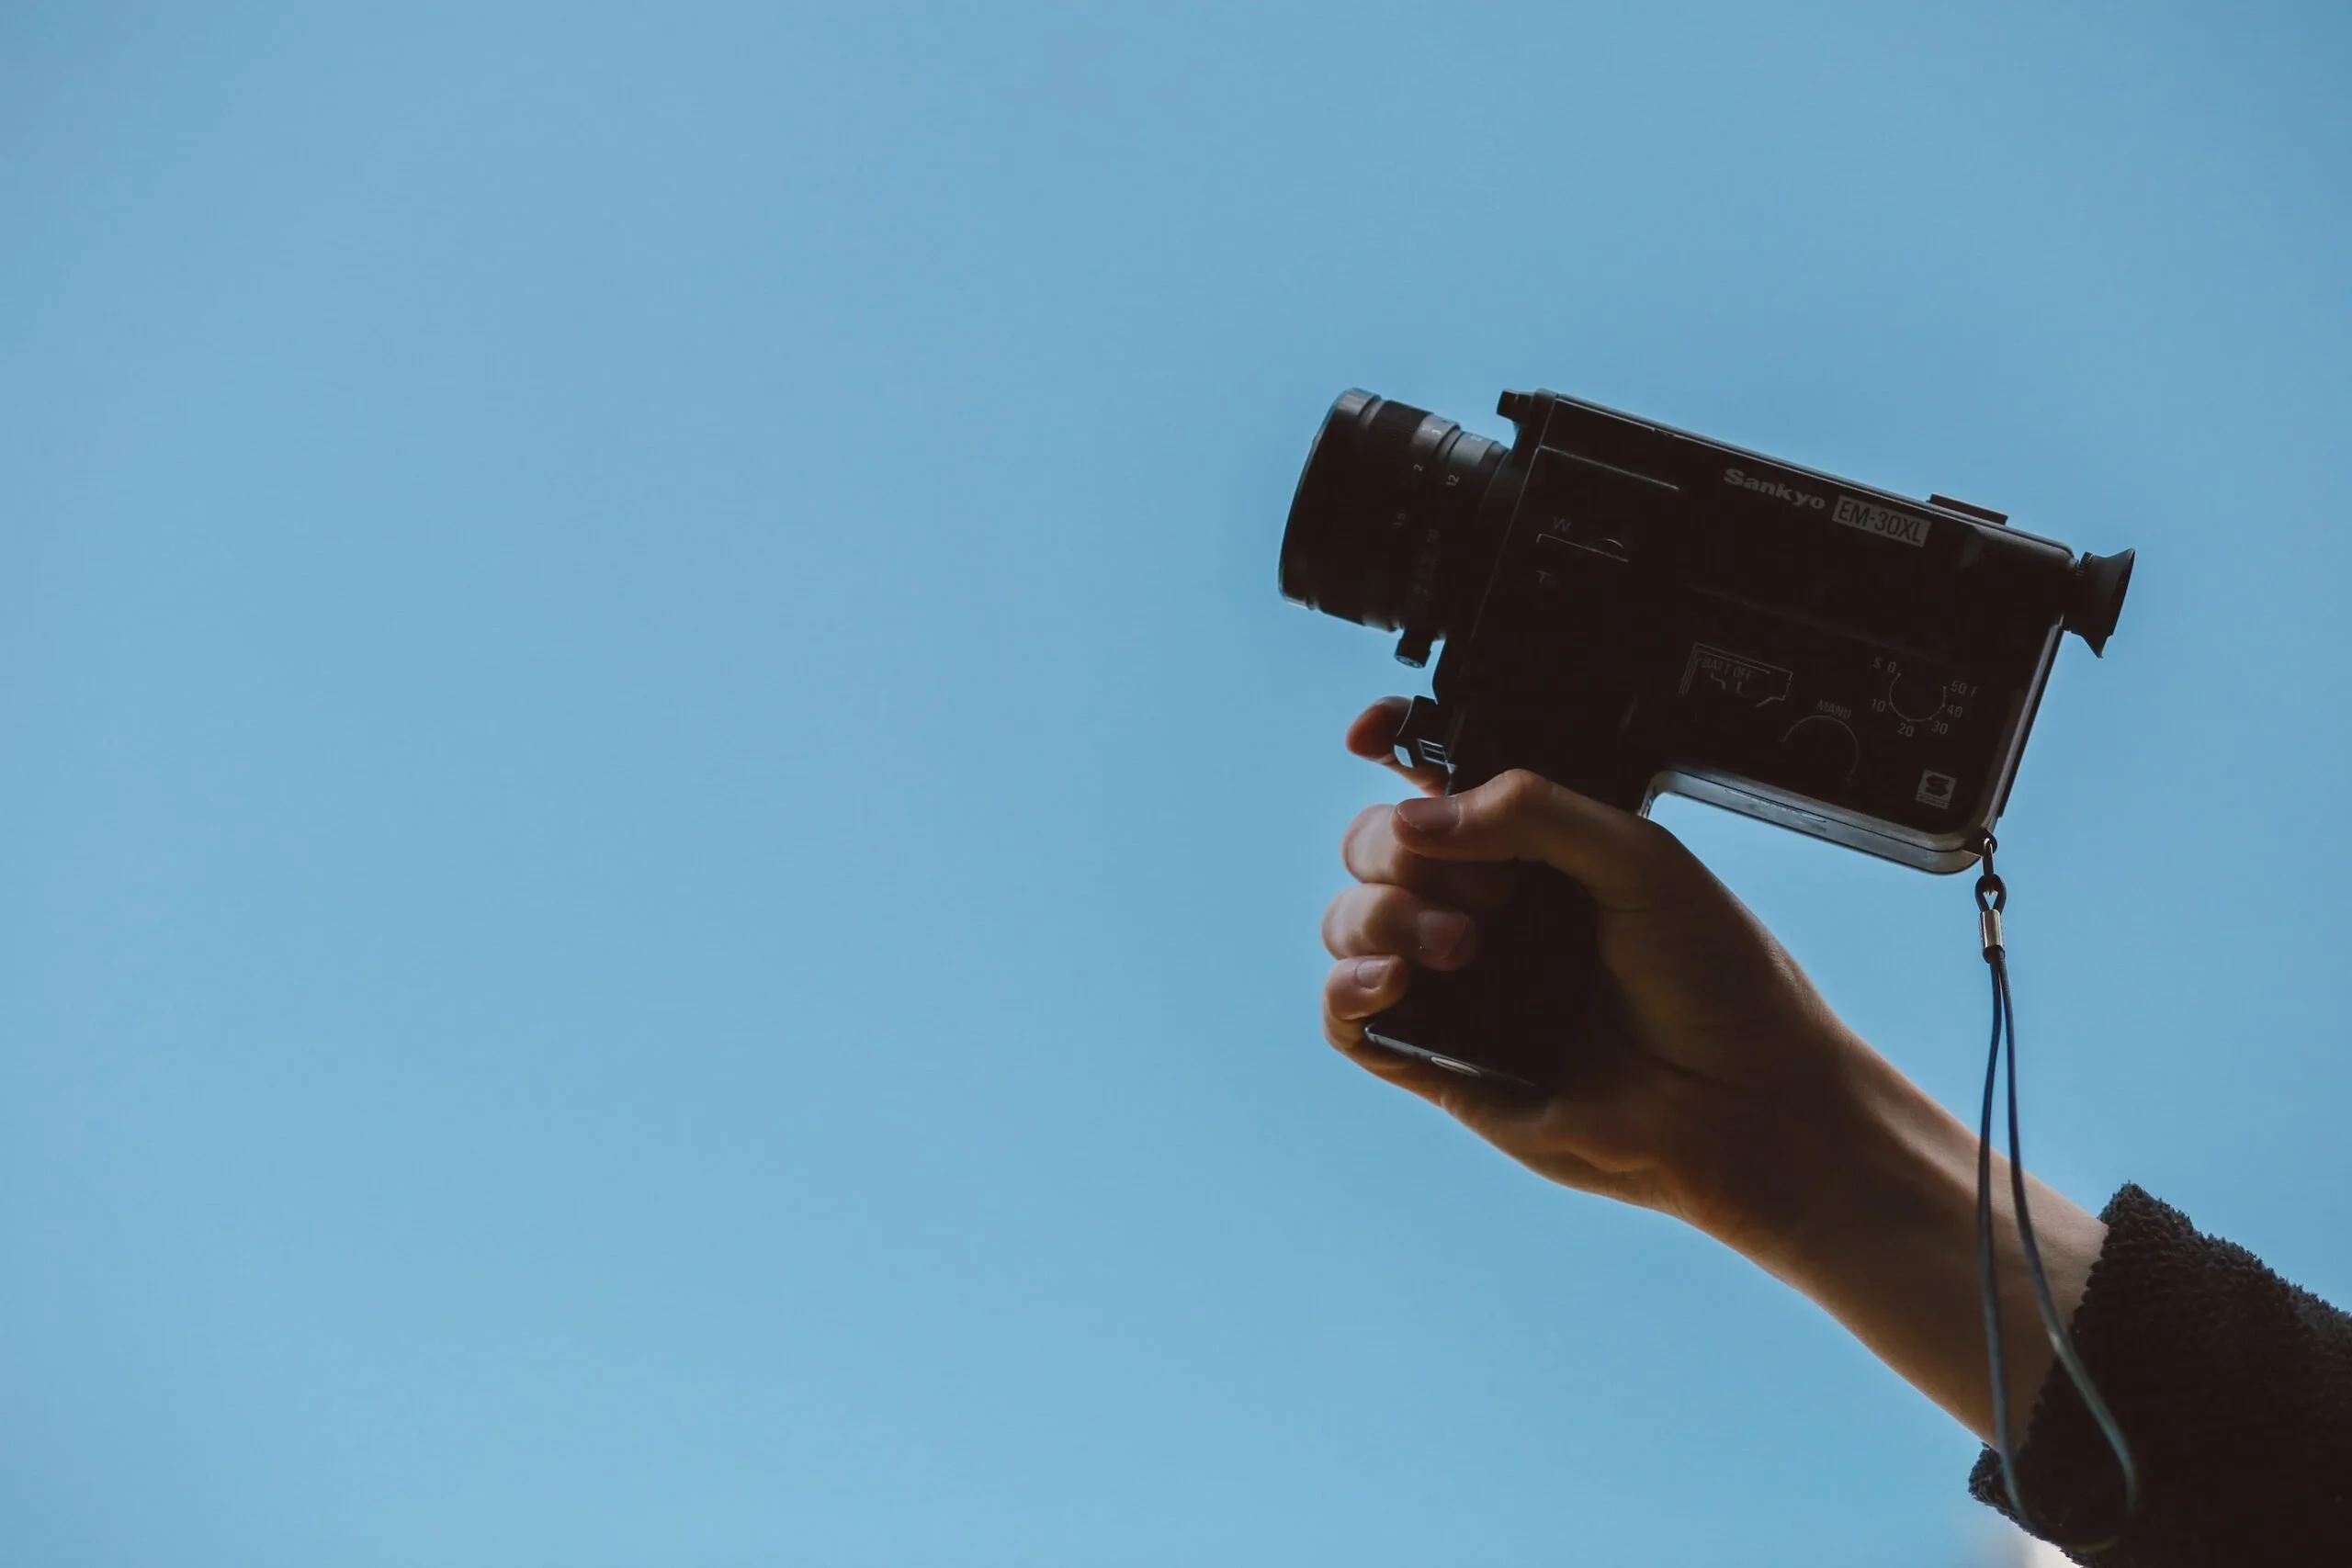 Super 8 film is making a comeback. Here’s how to get started.